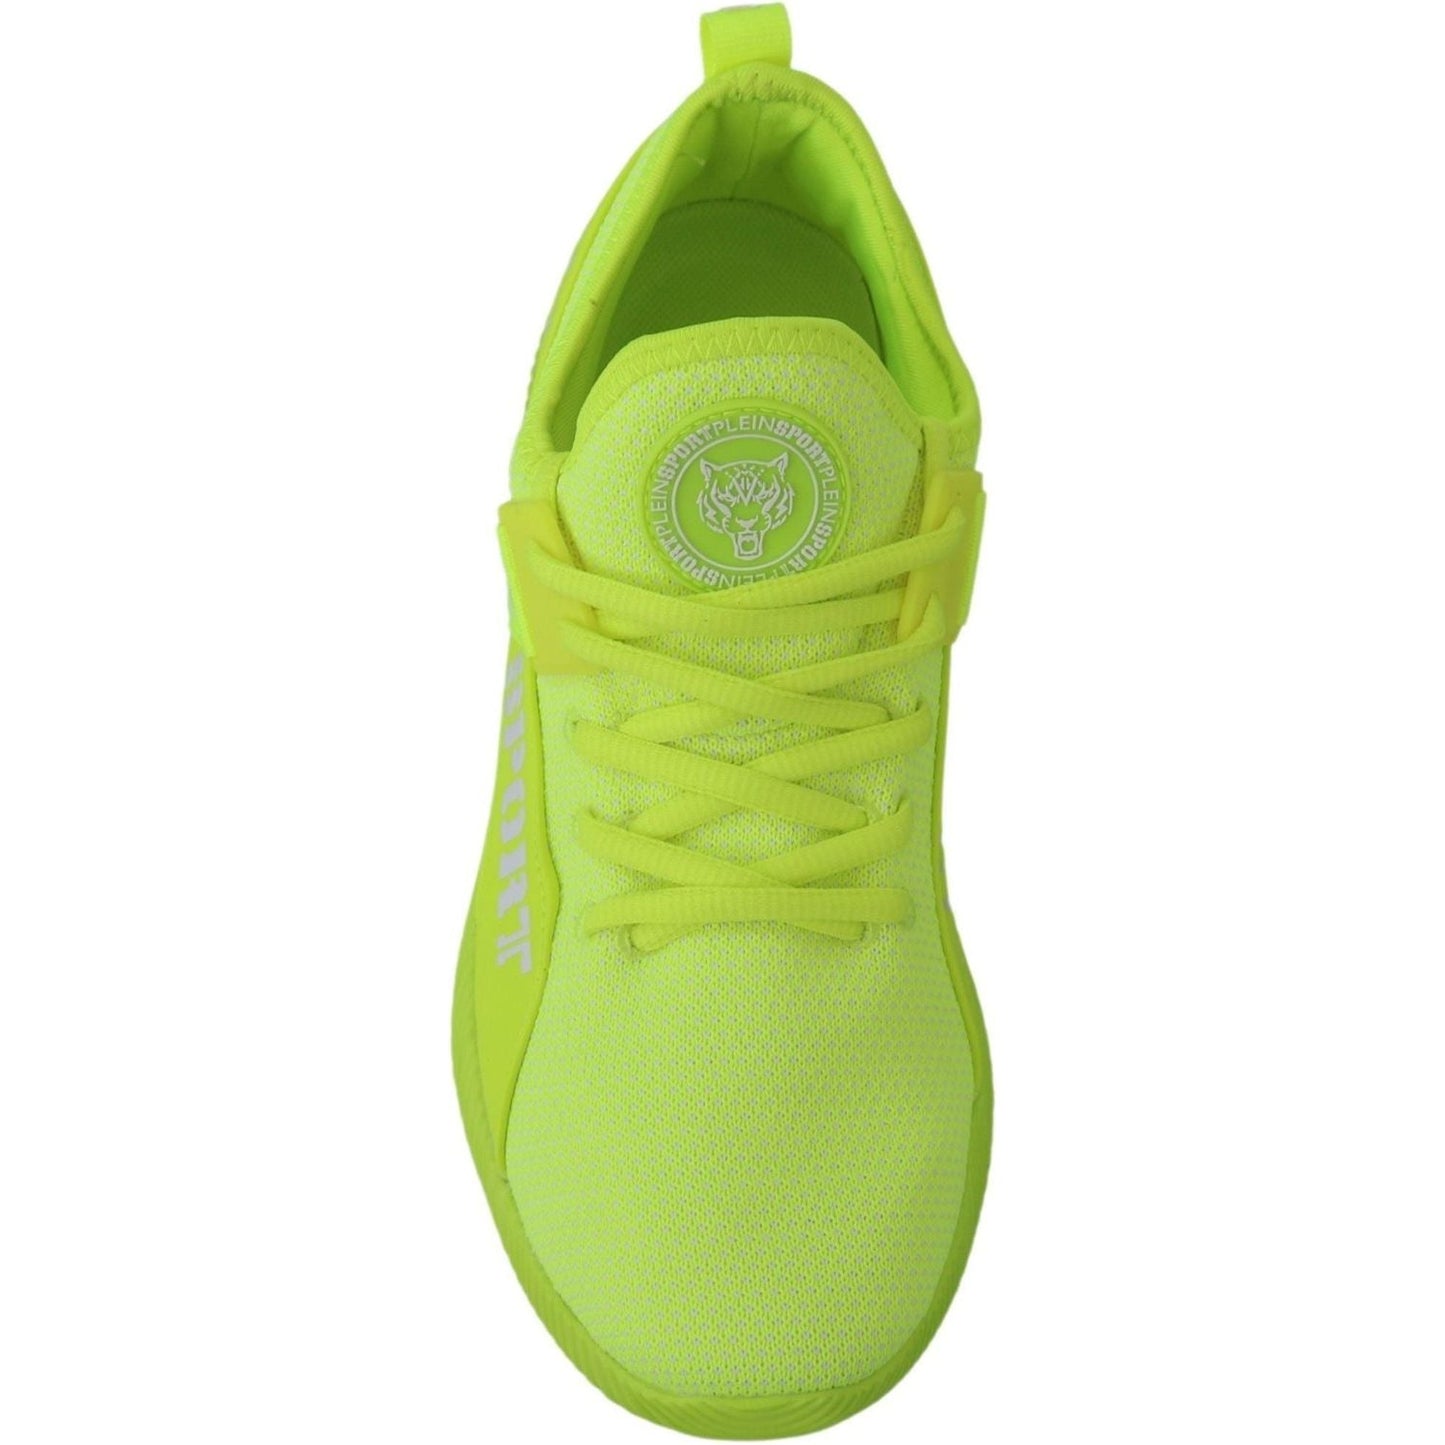 Plein Sport Electrify Your Step with Yellow Carter Sport Sneakers msc-sneakers-carter-yellow